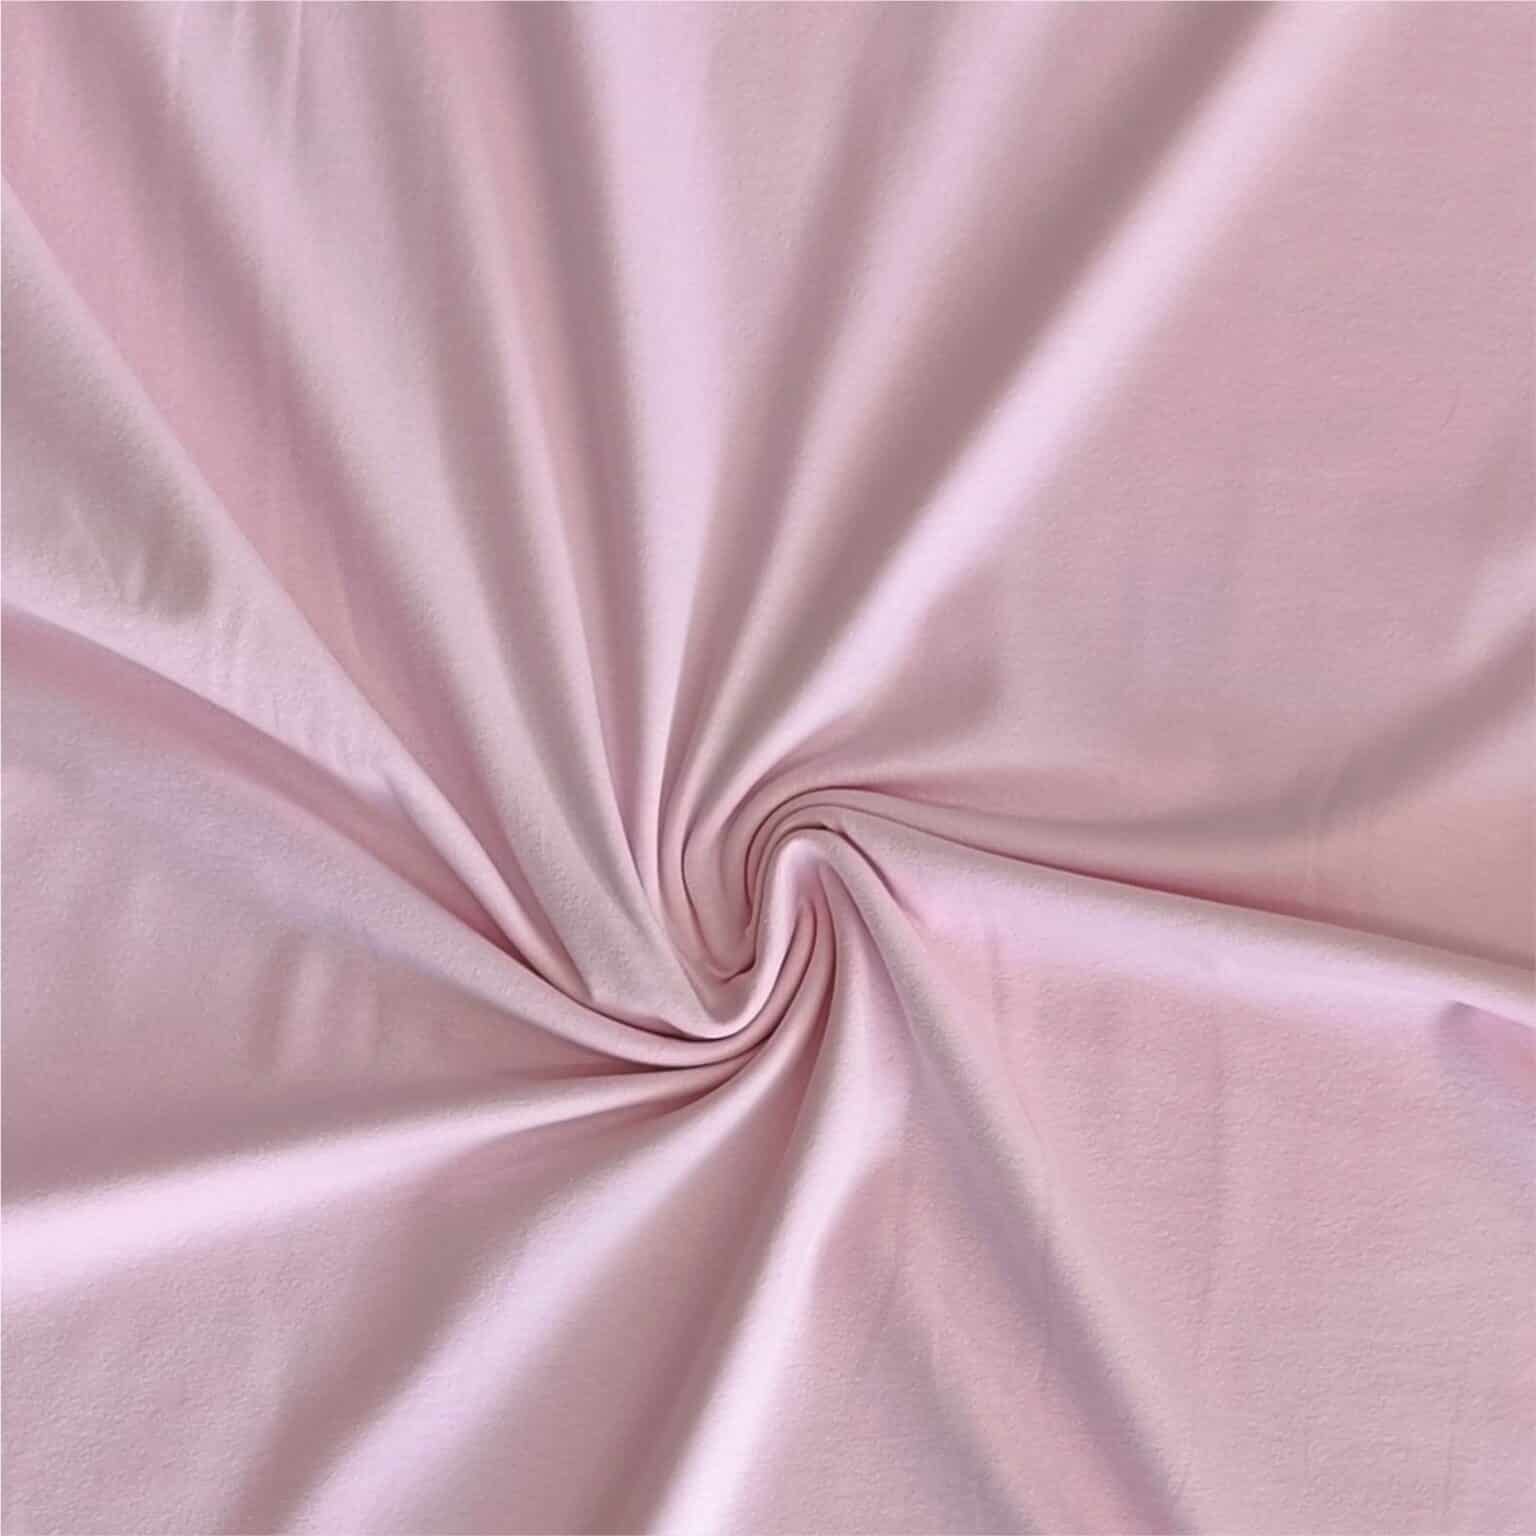 pale pink plain cotton jersey | More Sewing